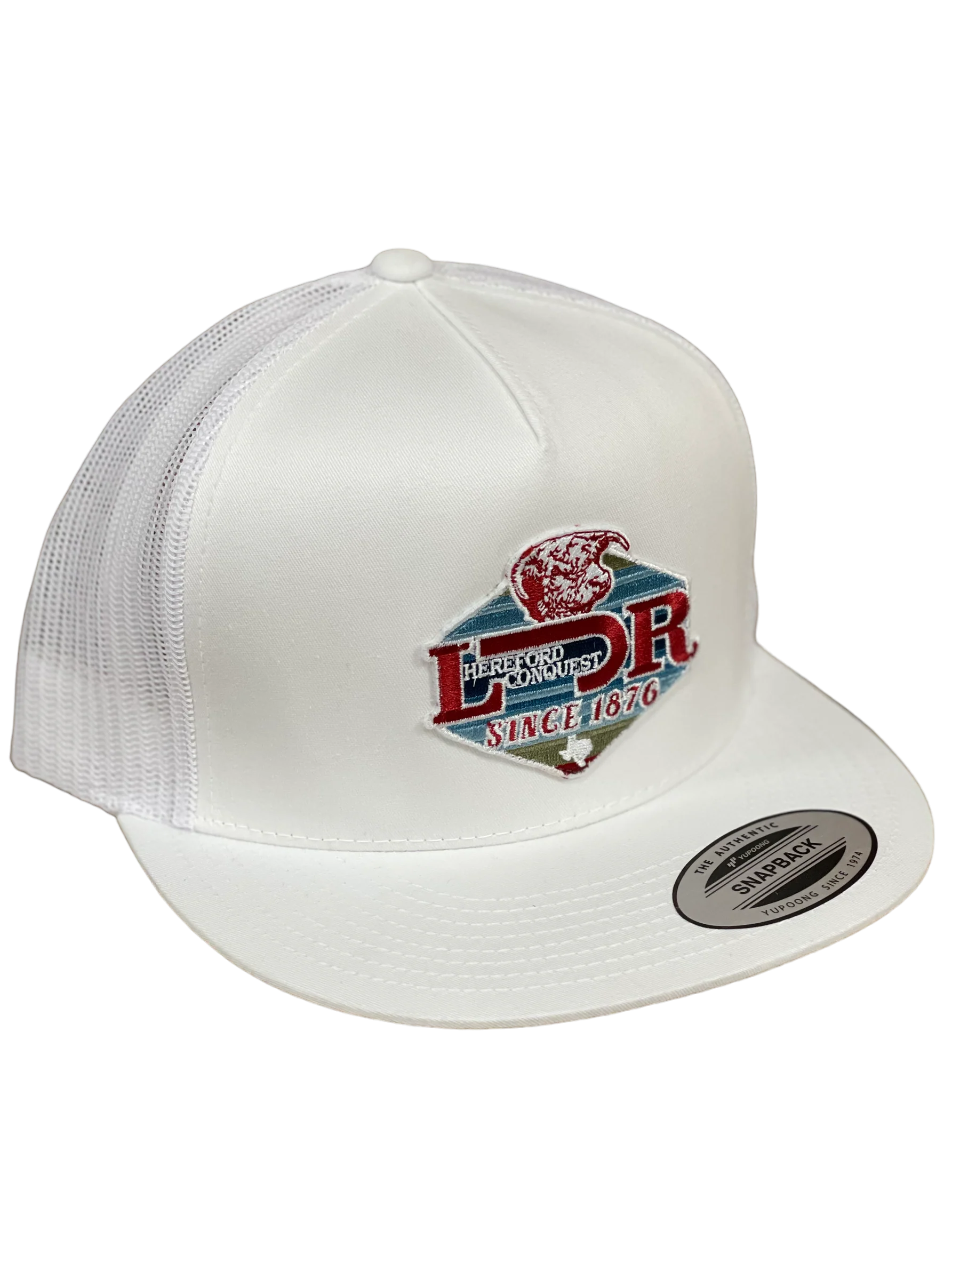 Lazy J Ranch Wear White & White Conquest Patch Cap